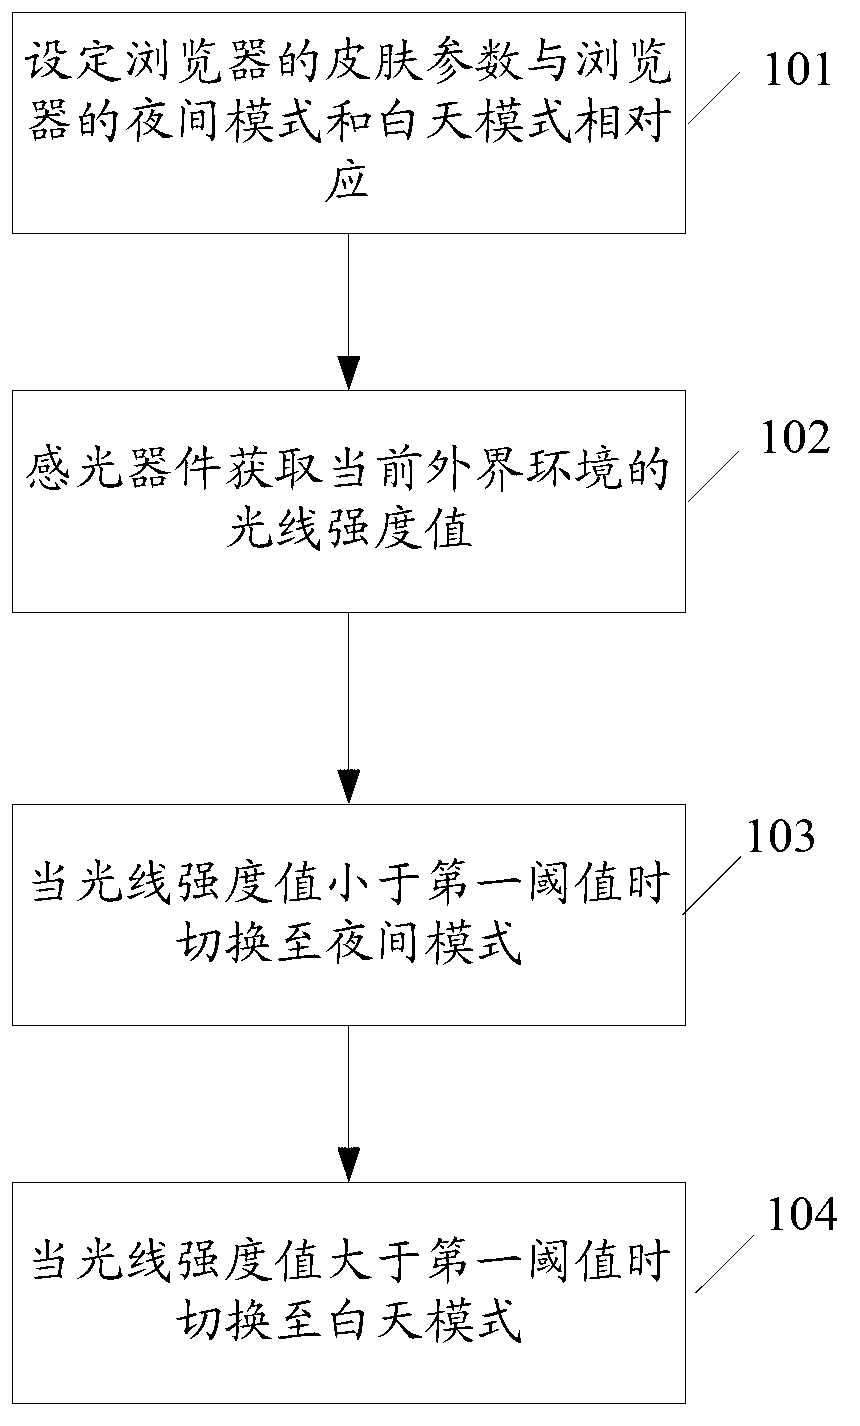 Mode switching method and device for browser skin brightness